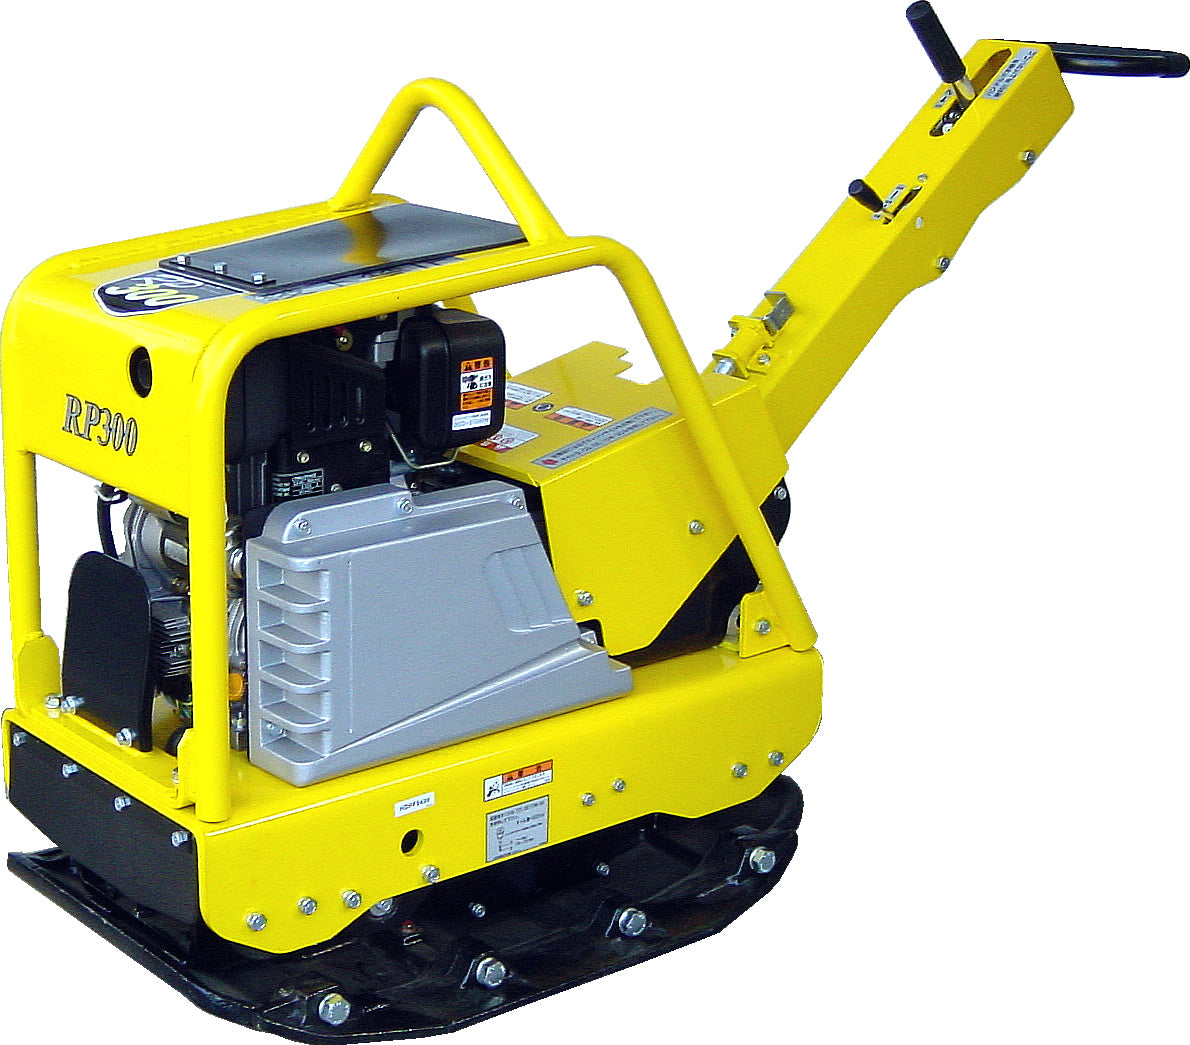 RP300X Reversible Plate Compactor